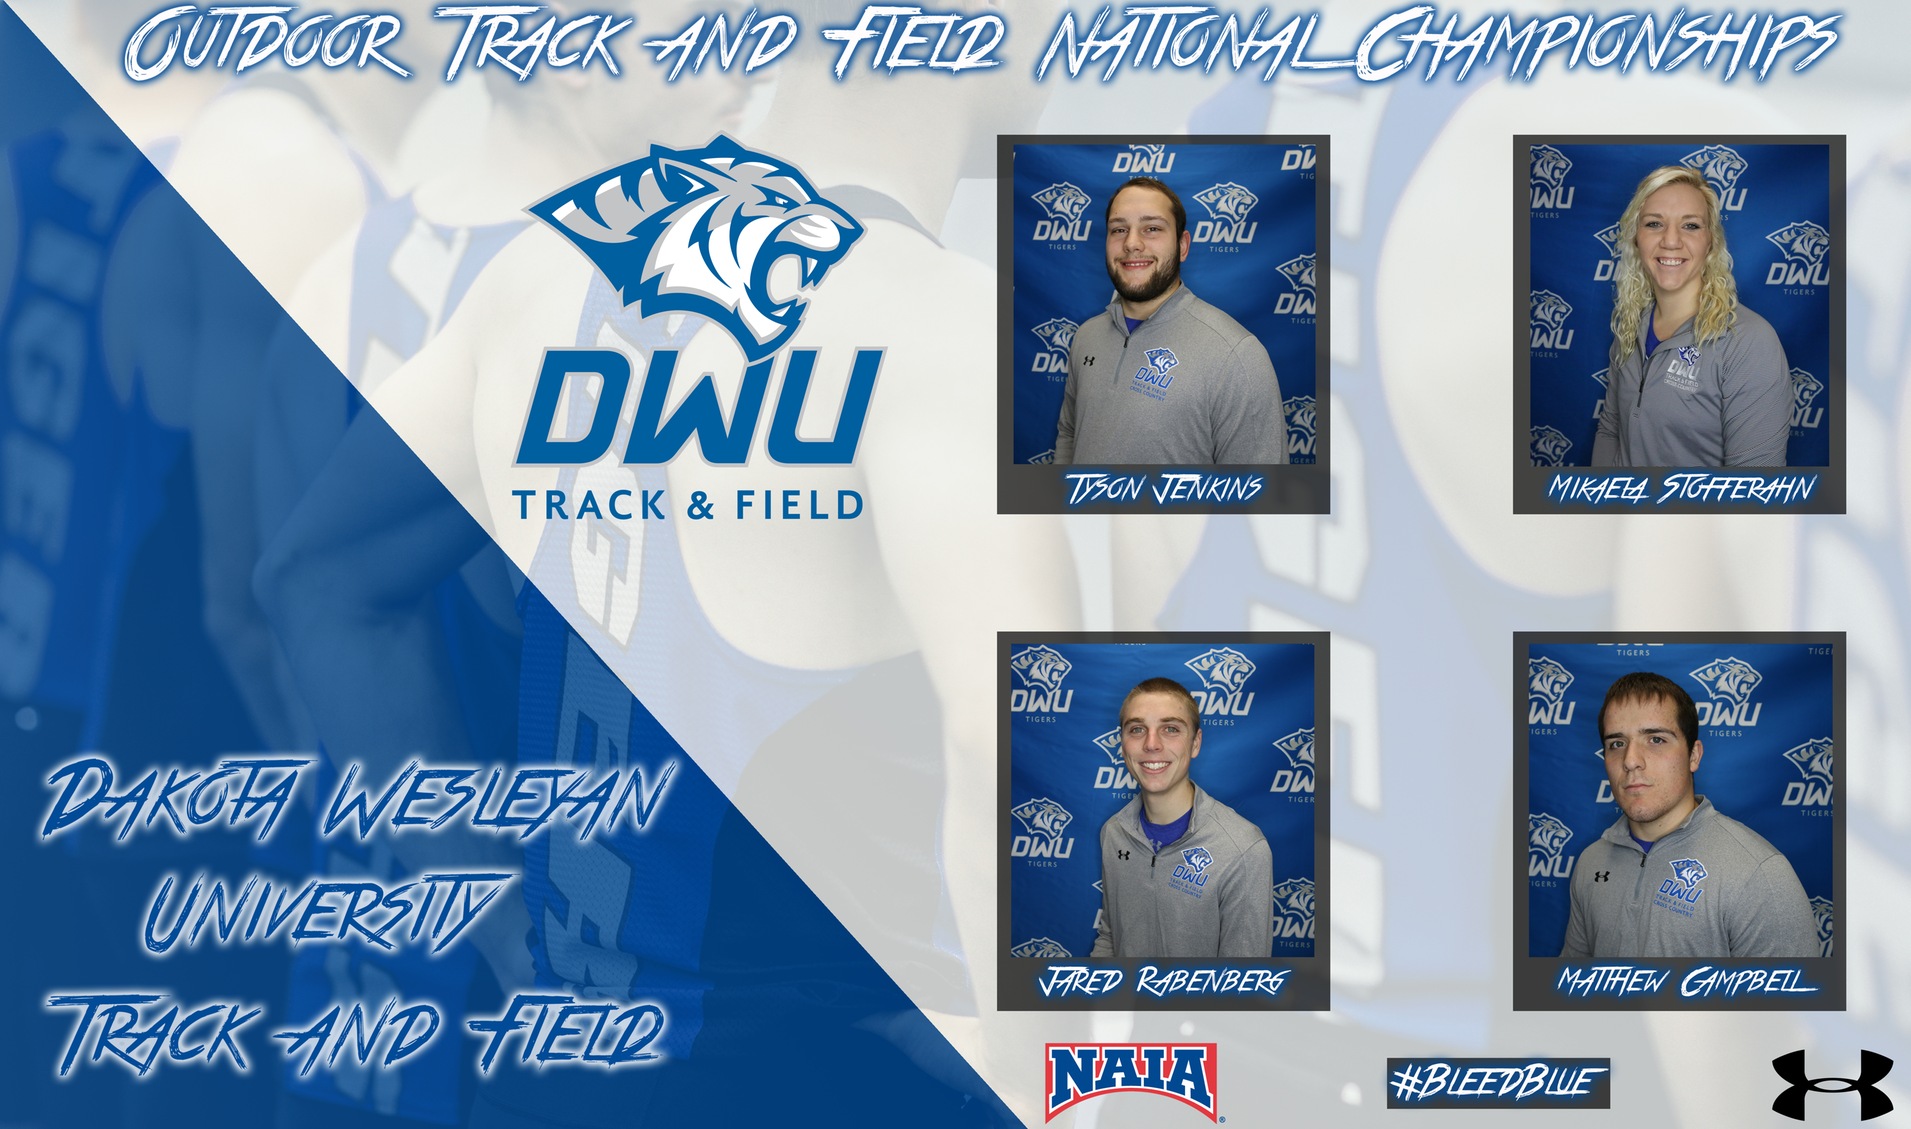 DWU track and field tallies three All-Americans at national championships